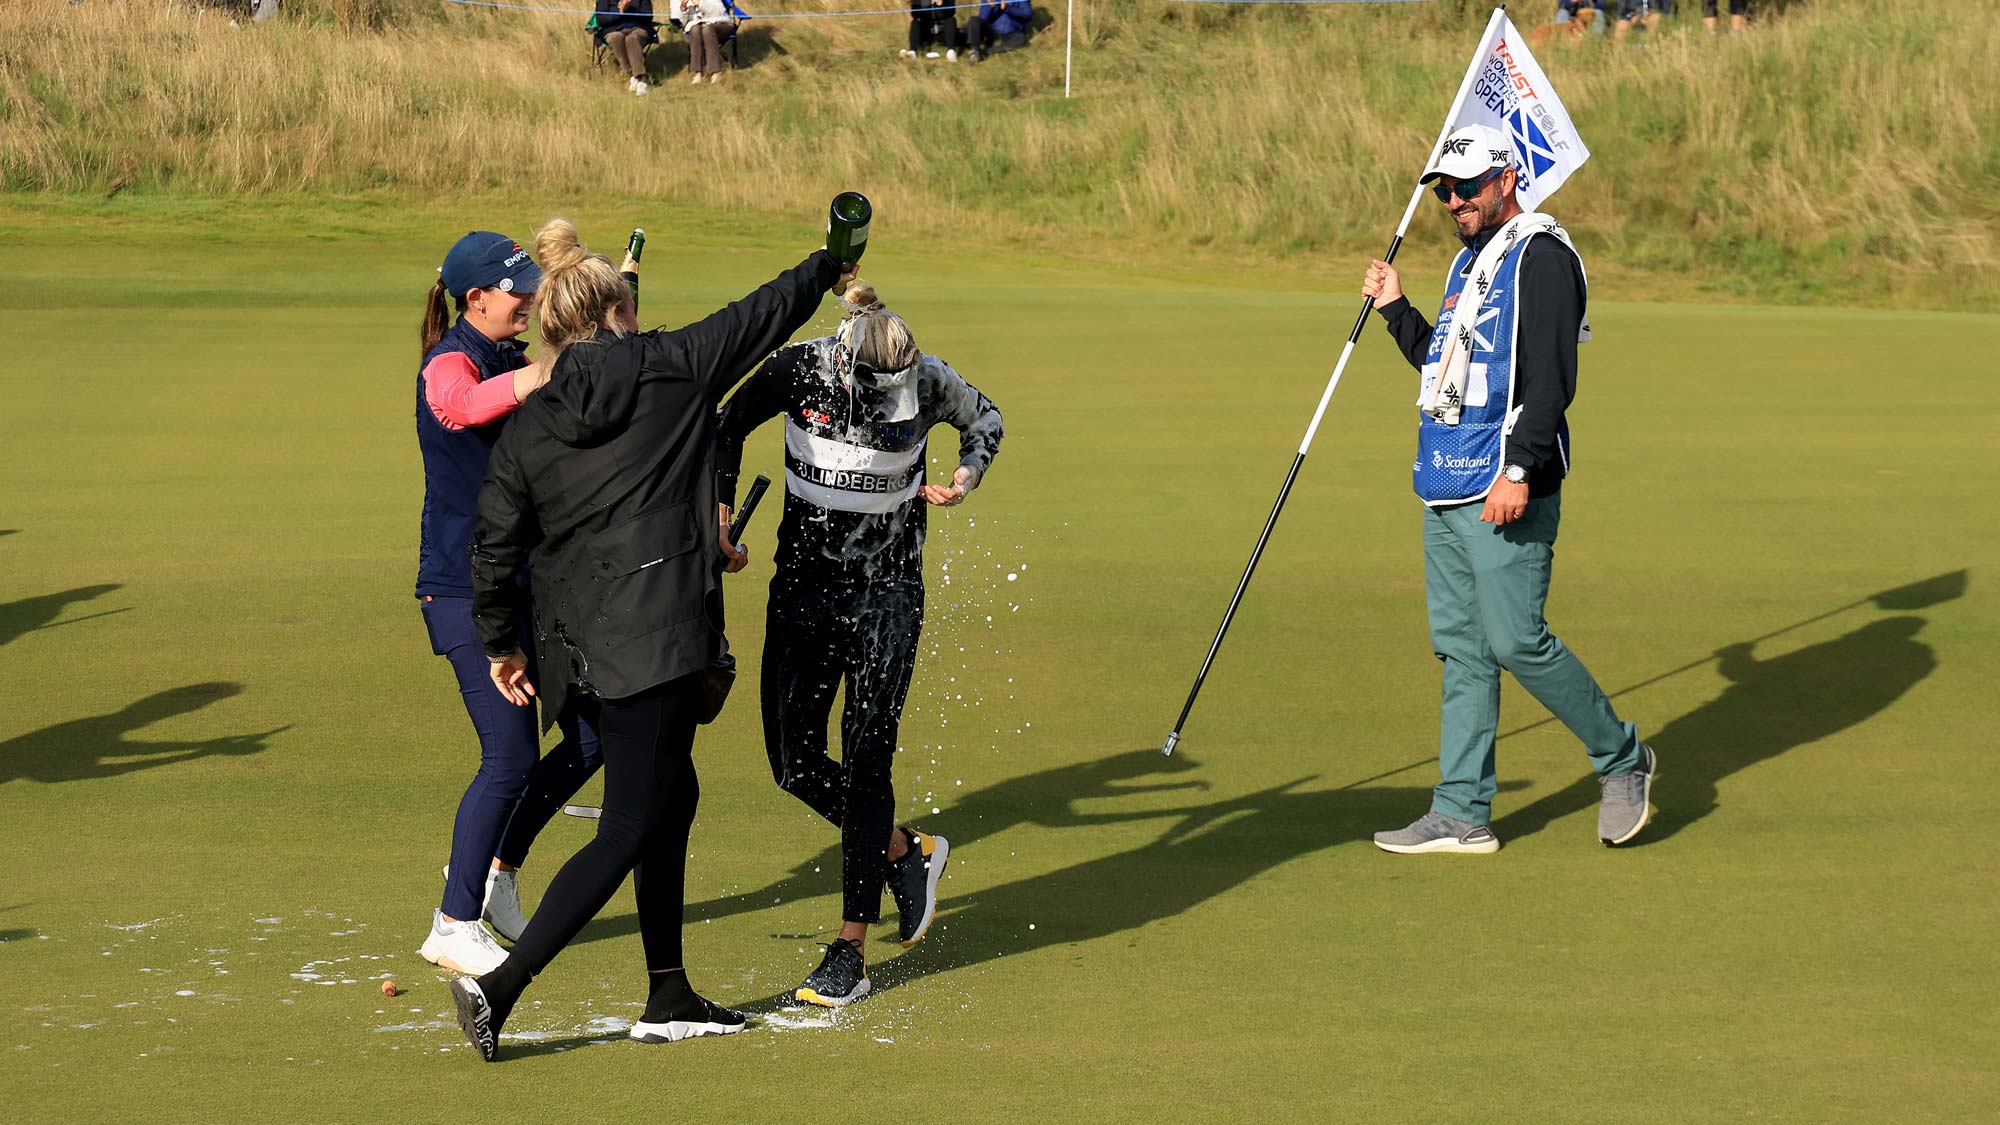 Ryann O'Toole of The United States is doused in champagne by friends after sealing her maiden LPGA victory by three shots on the 18th hole during the final round of the Trust Golf Women's Scottish Open